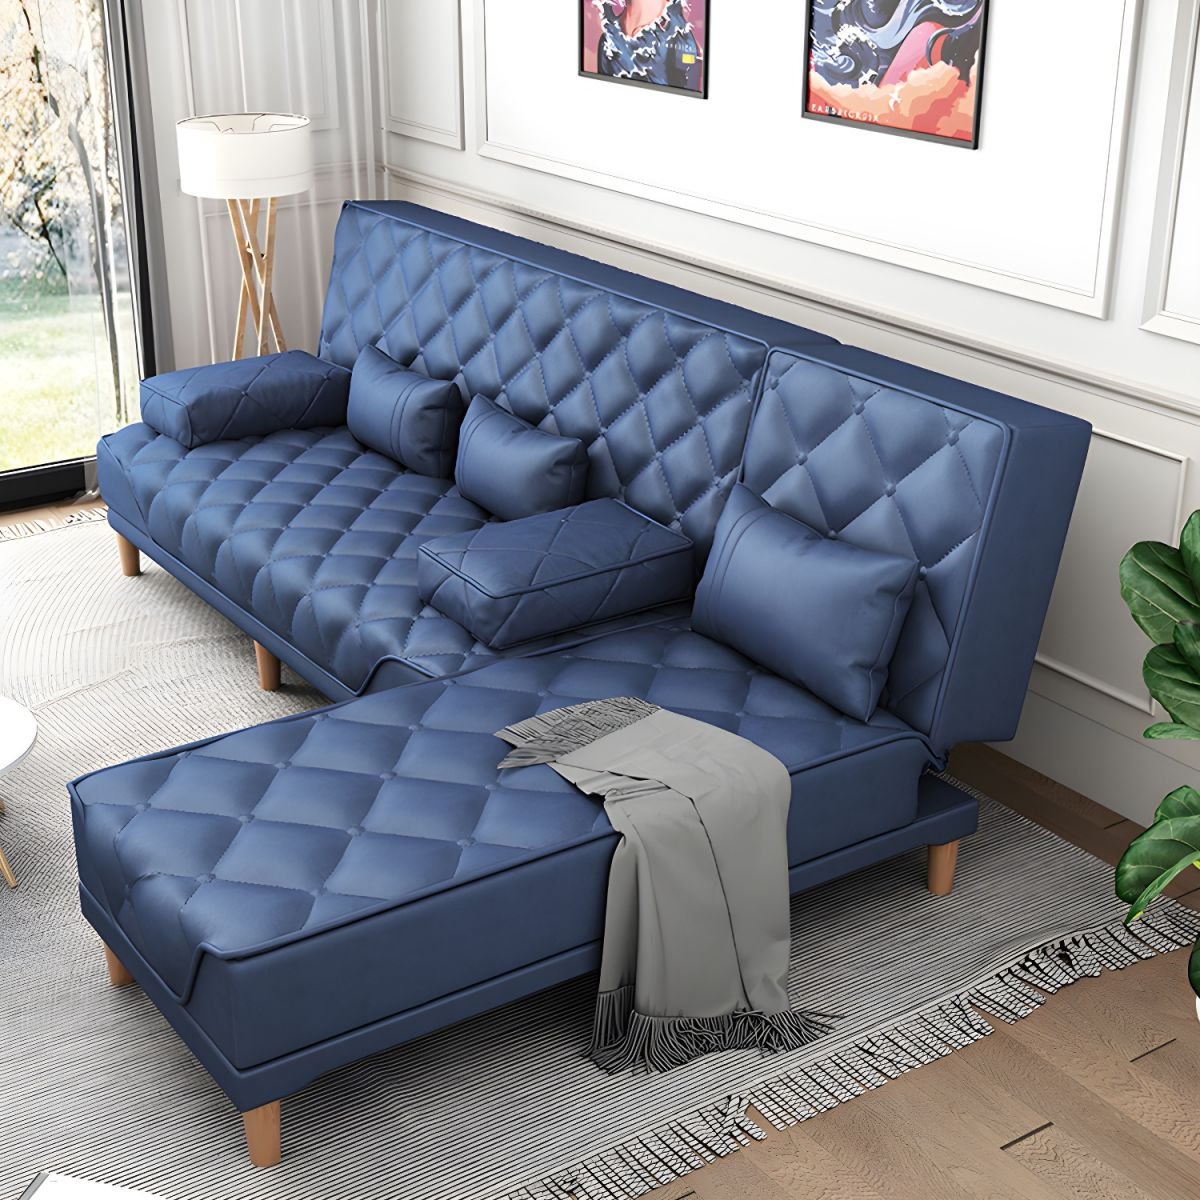 Contemporary Tight Back Convertible Sofa and Chaise with Pillow Top Arm - 73"L x 57"W x 34"H Dark Blue Tech Cloth